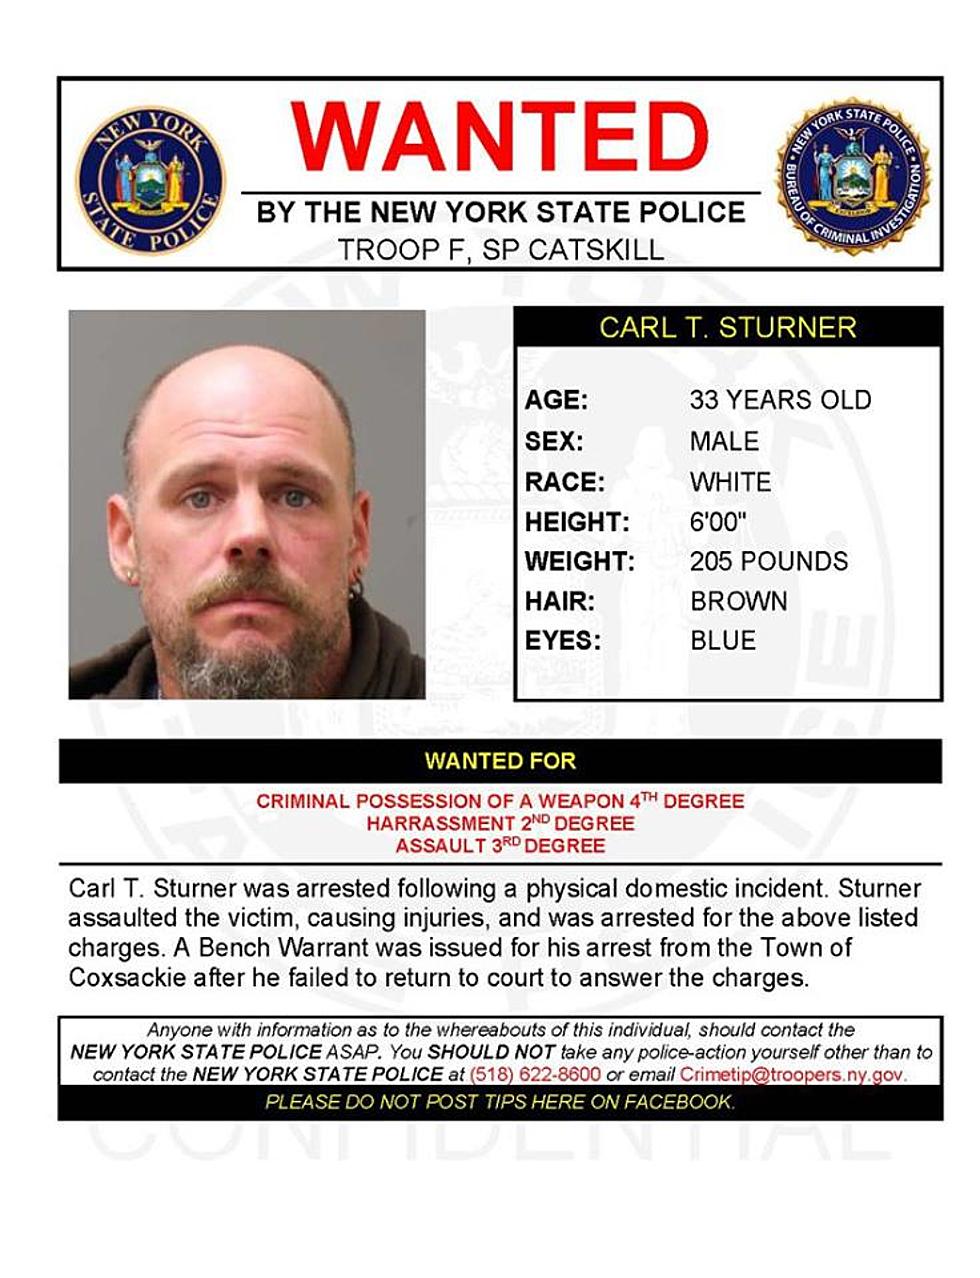 Warrant Wednesday: Greene County Man Wanted For Harassment and Assault